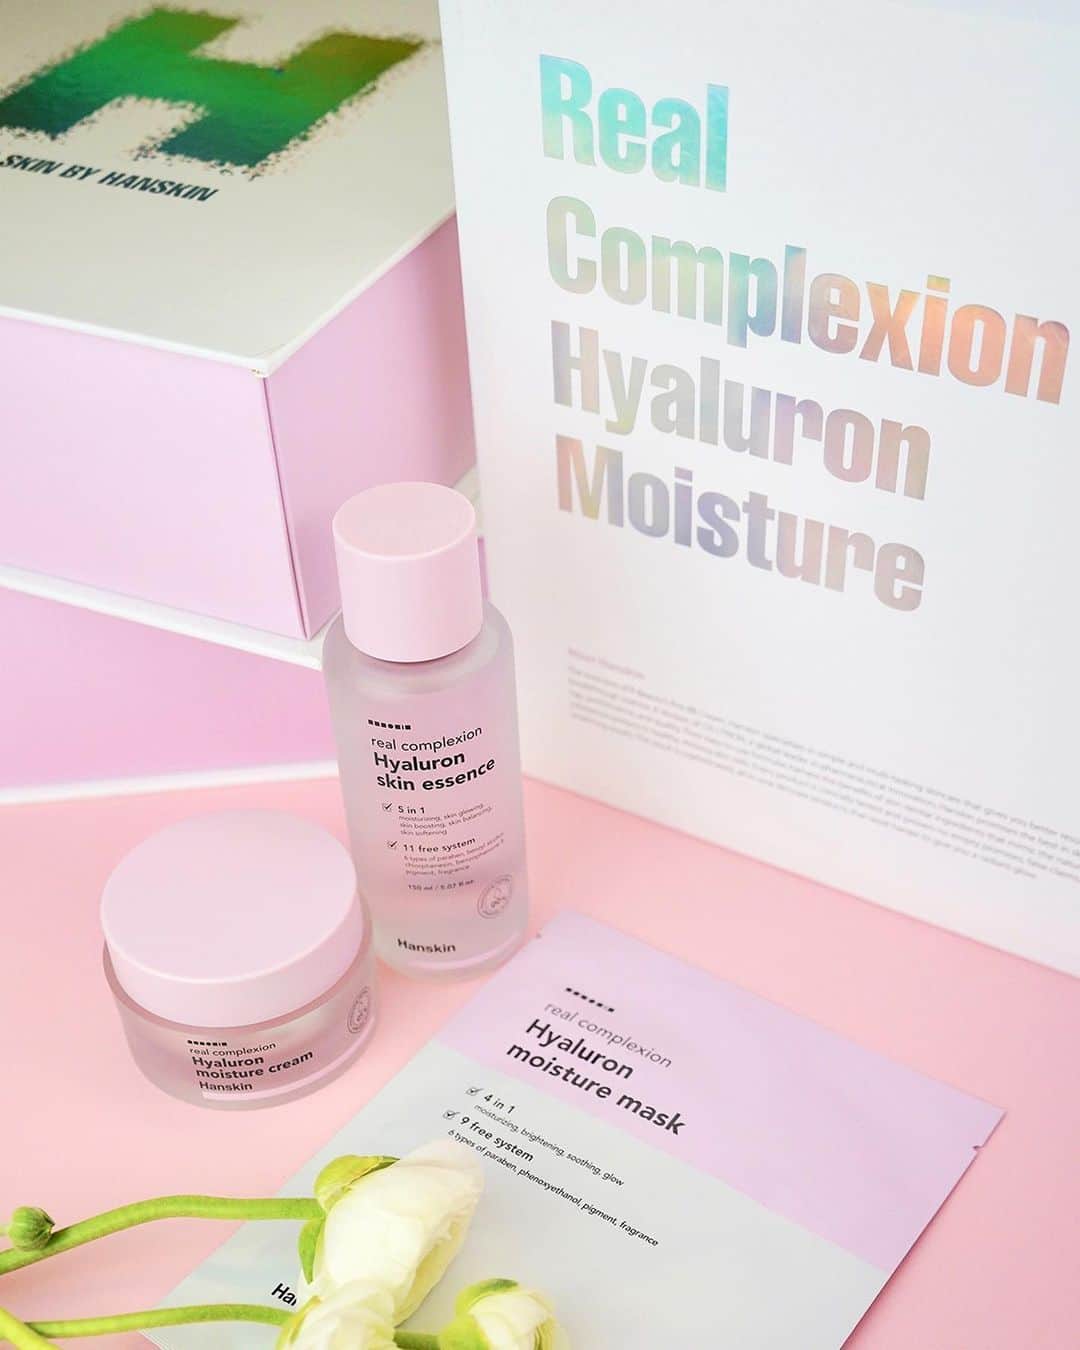 C.O. Bigelowさんのインスタグラム写真 - (C.O. BigelowInstagram)「It's a K-Beauty #GIVEAWAY! 💖 Let's welcome @hanskin_usa, Korea's leading skincare brand, to the Bigelow family! 👏 Enter to win Hanskin's Hyaluron trio kit 💦  for that dewey #GlassSkin glow: ⠀⠀⠀⠀⠀⠀⠀⠀⠀ ⠀⠀⠀⠀⠀⠀⠀⠀⠀ ⠀⠀⠀⠀⠀⠀⠀⠀⠀ ⠀⠀⠀⠀⠀⠀⠀⠀⠀ ✨ Hyaluron Skin Essence locks in moisture after cleaning and helps restore your skin's natural luster. ✨ Hyaluron Moisture Mask helps illuminate your skin in just 15 minutes. ✨ Hyaluron Moisture Cream uses hibiscus extract to fight aging and neutralize free radicals. ⠀⠀⠀⠀⠀⠀⠀⠀⠀ ⠀⠀⠀⠀⠀⠀⠀⠀⠀ To enter, like this post, tag a friend below, and follow @hanskin_usa and @cobigelow. THREE lucky winners will be selected on May 14th at noon! Good luck!🤞 *U.S. residents only」5月8日 1時08分 - cobigelow